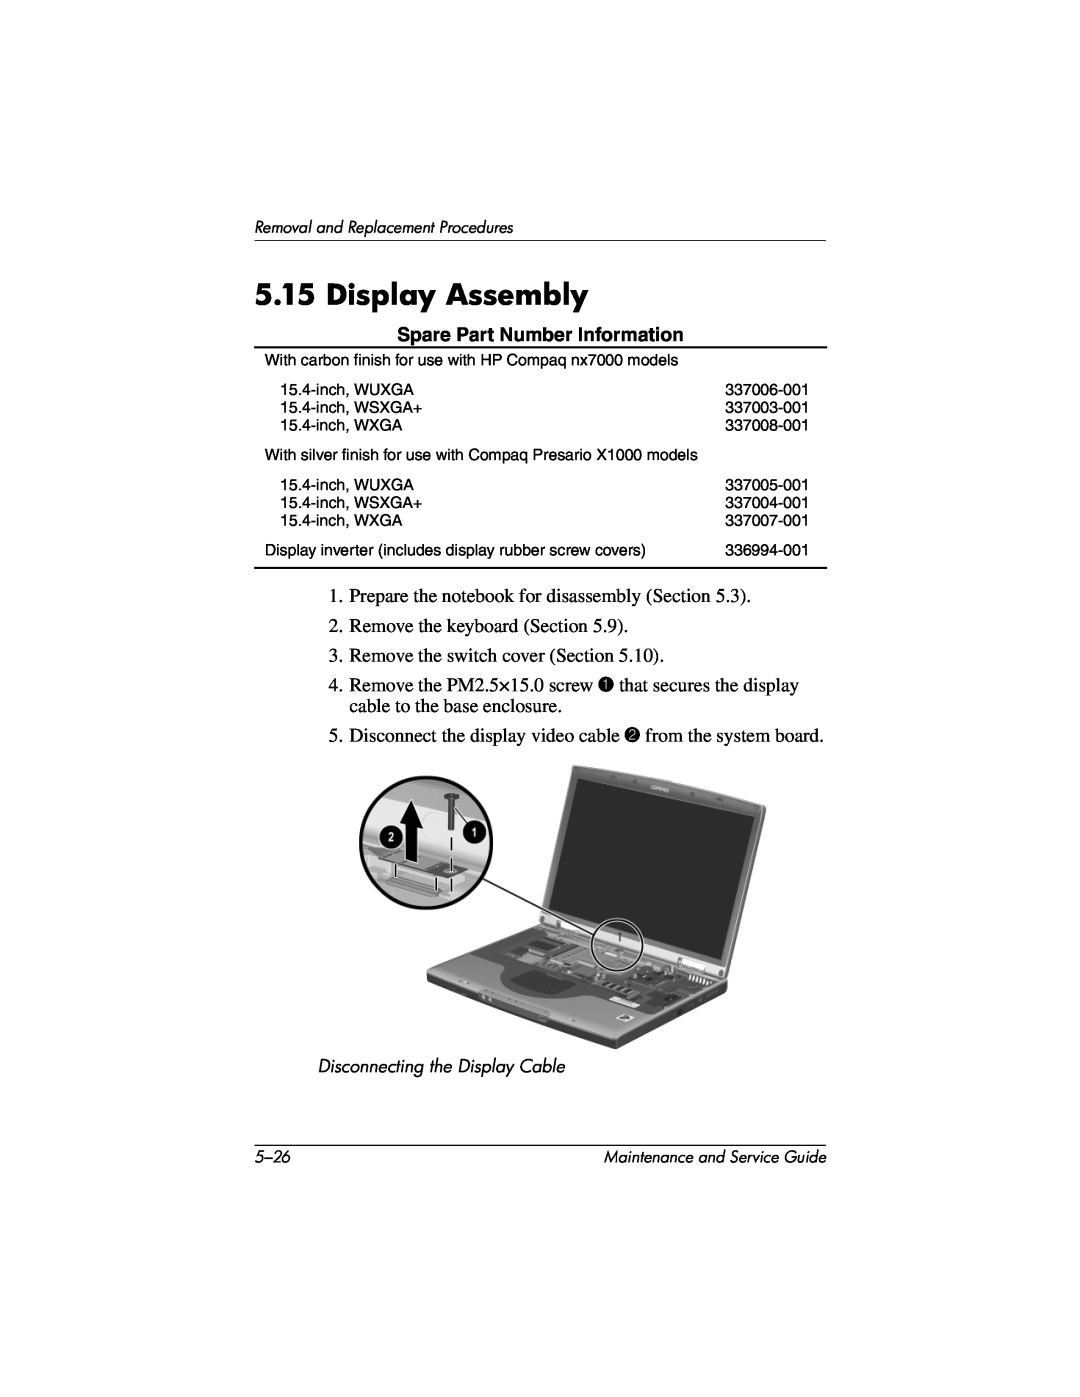 HP X1000, nx7000 manual Display Assembly, Disconnecting the Display Cable 